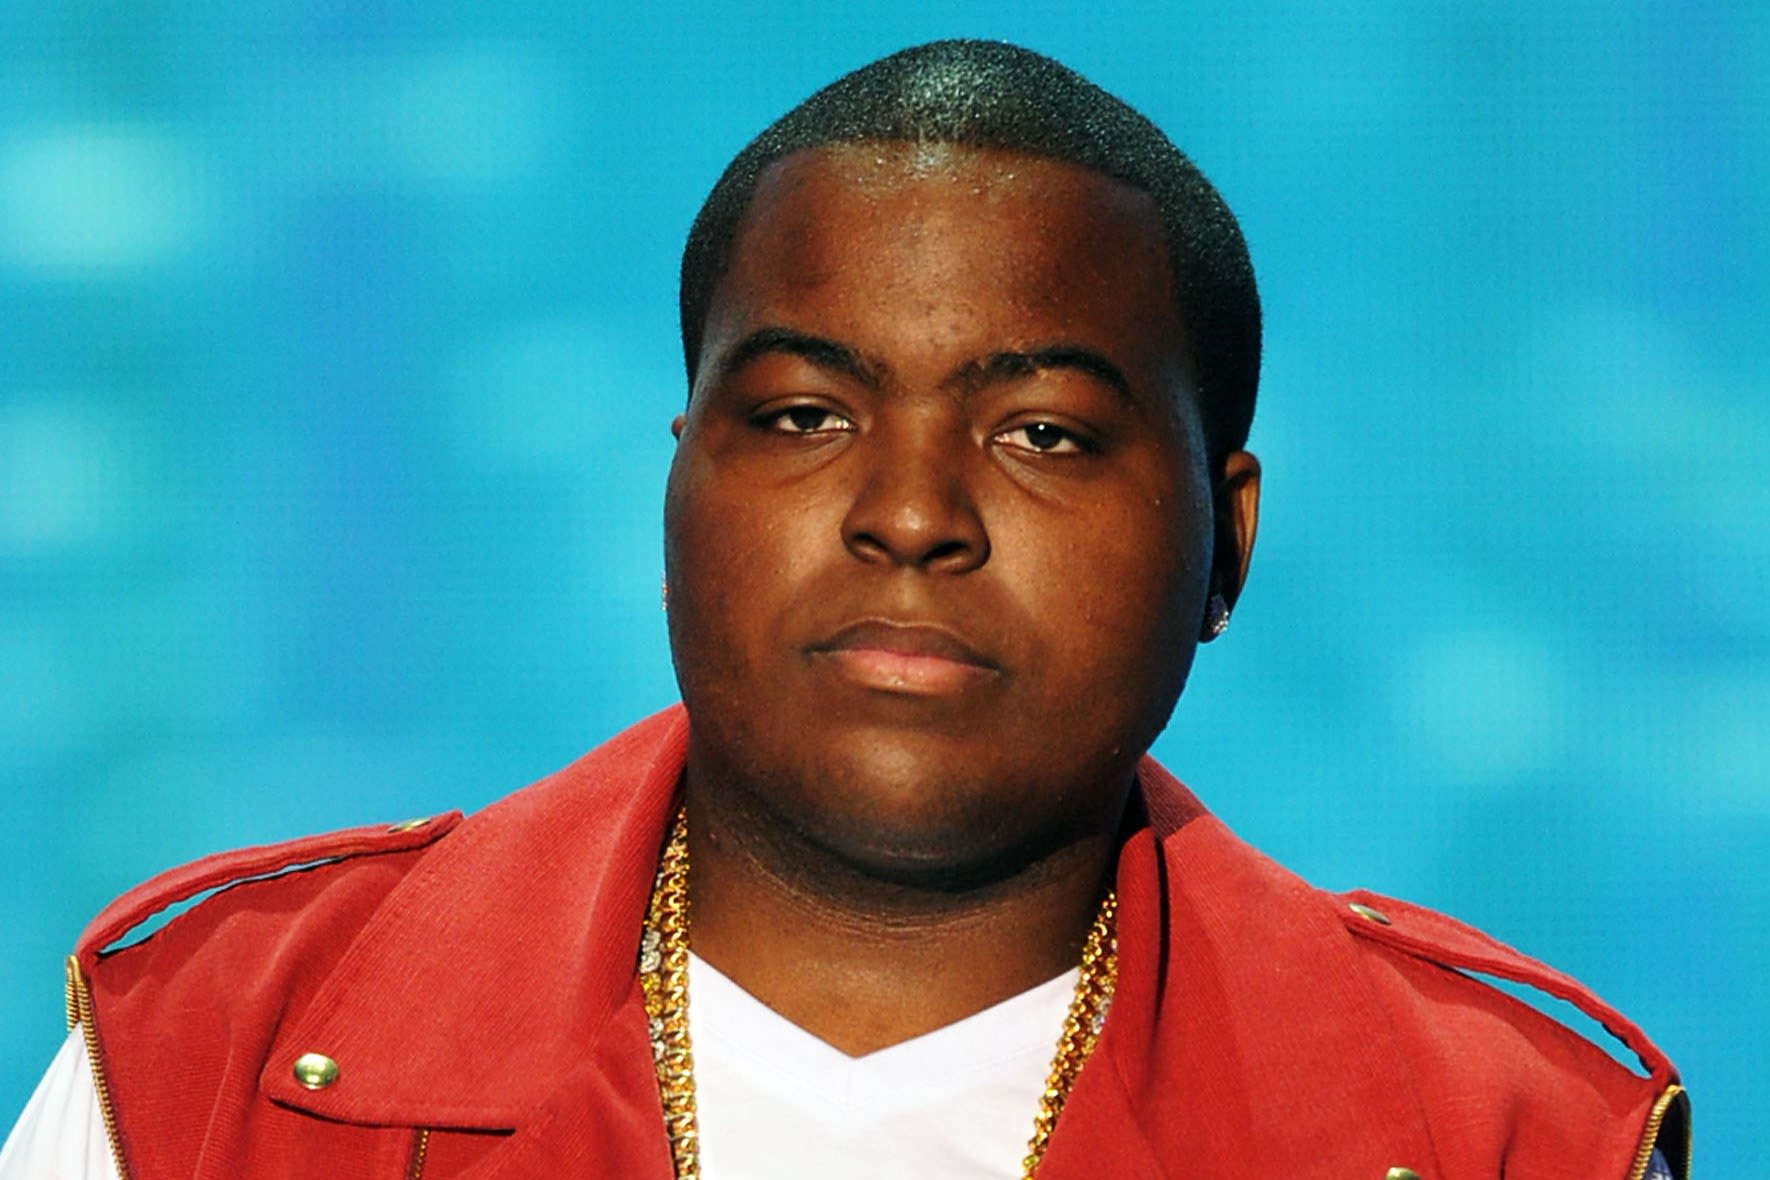 Sean Kingston Arrested on Theft and Fraud Charges Following SWAT Raid and Mother’s Arrest